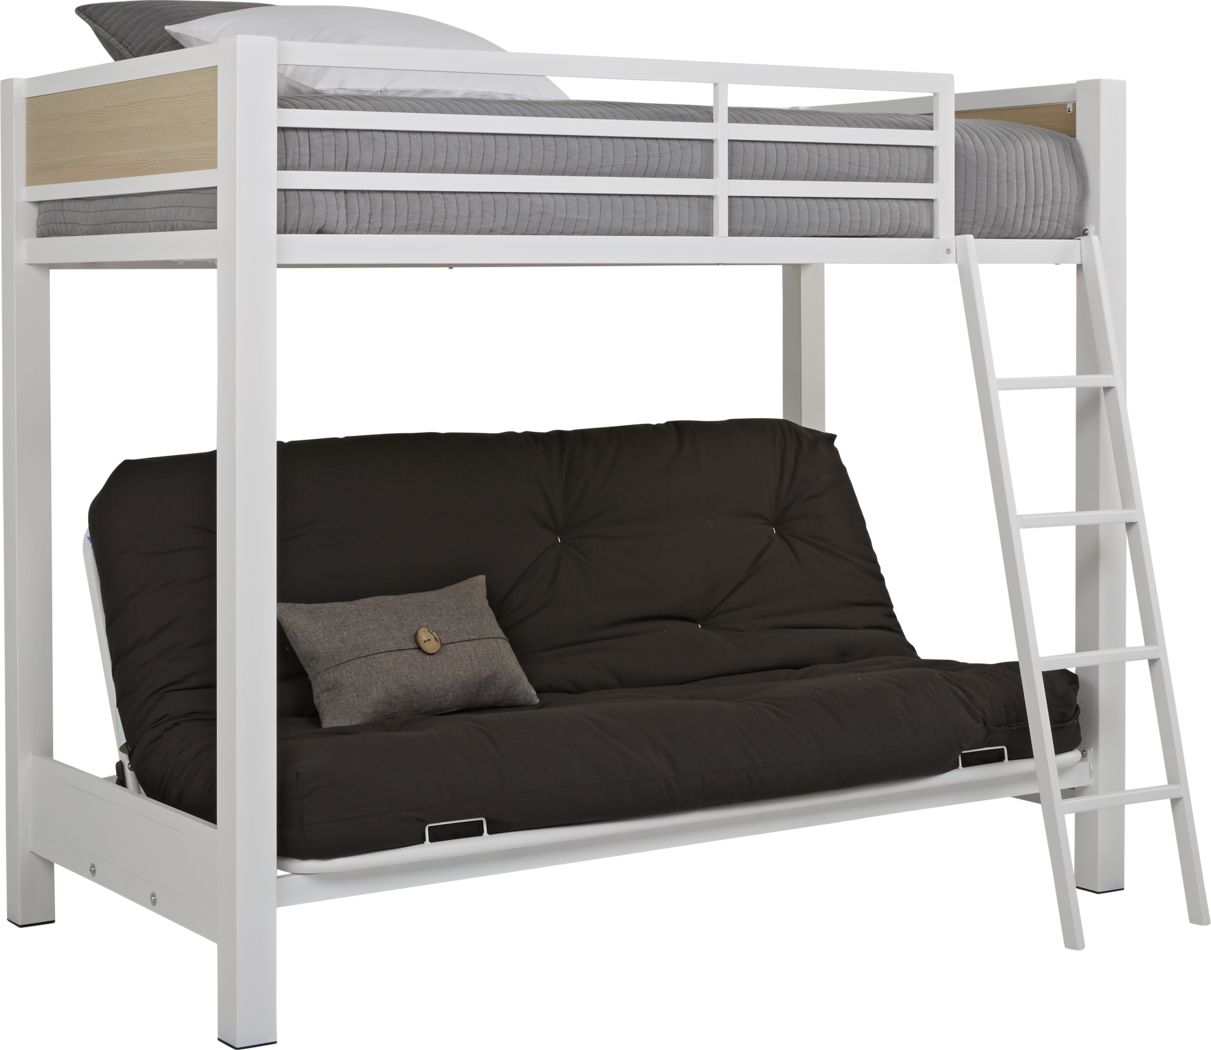 Bunk Beds For Kids, Rooms To Go Bunk Bed With Slide